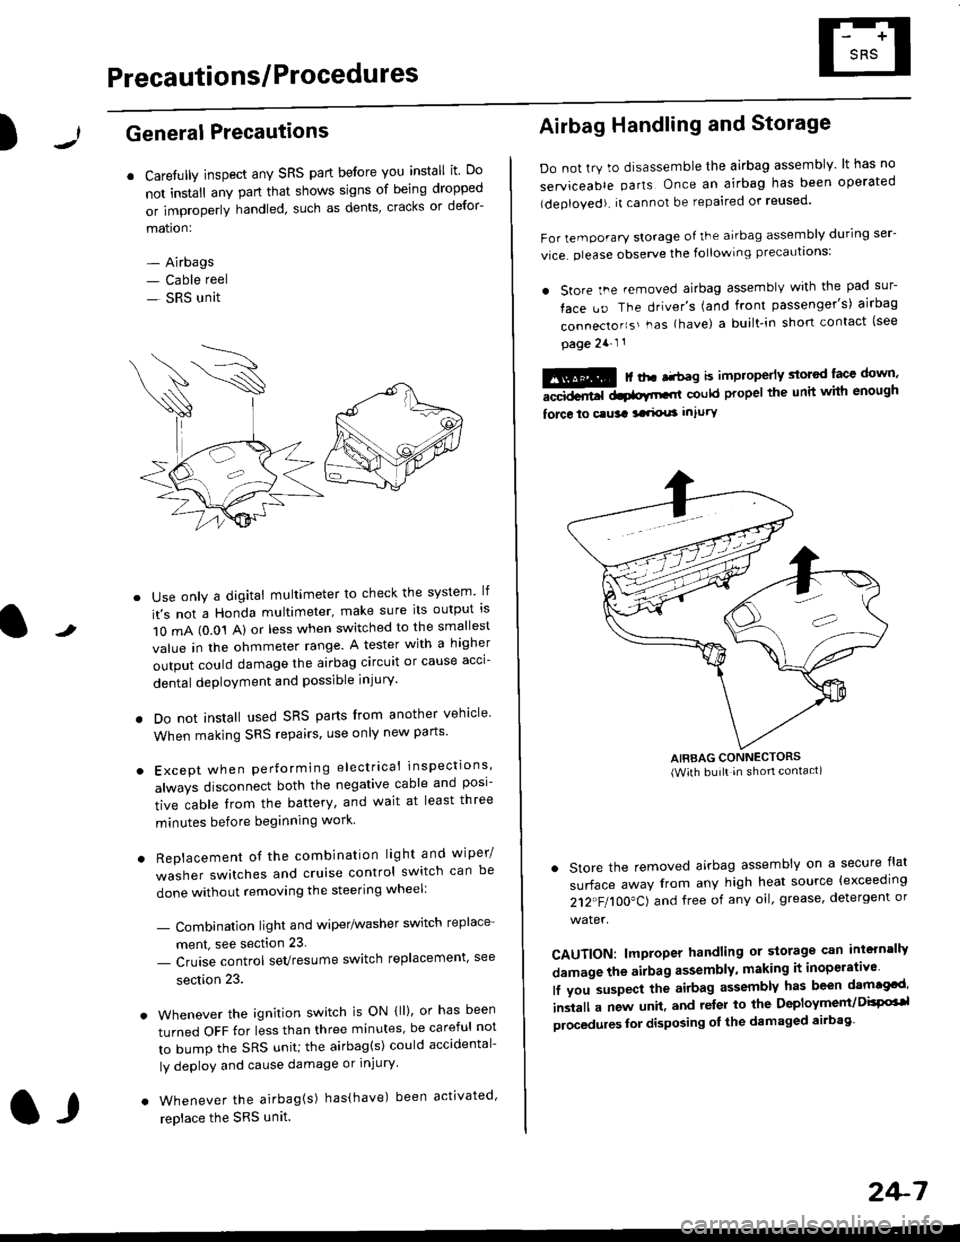 HONDA CIVIC 1996 6.G Repair Manual Precautions/ Procedures
)General Precautions
r Carefully inspect any SRS part before you install it Do
not install any part that shows signs of being dropped
or improperly handled such as dents, crac